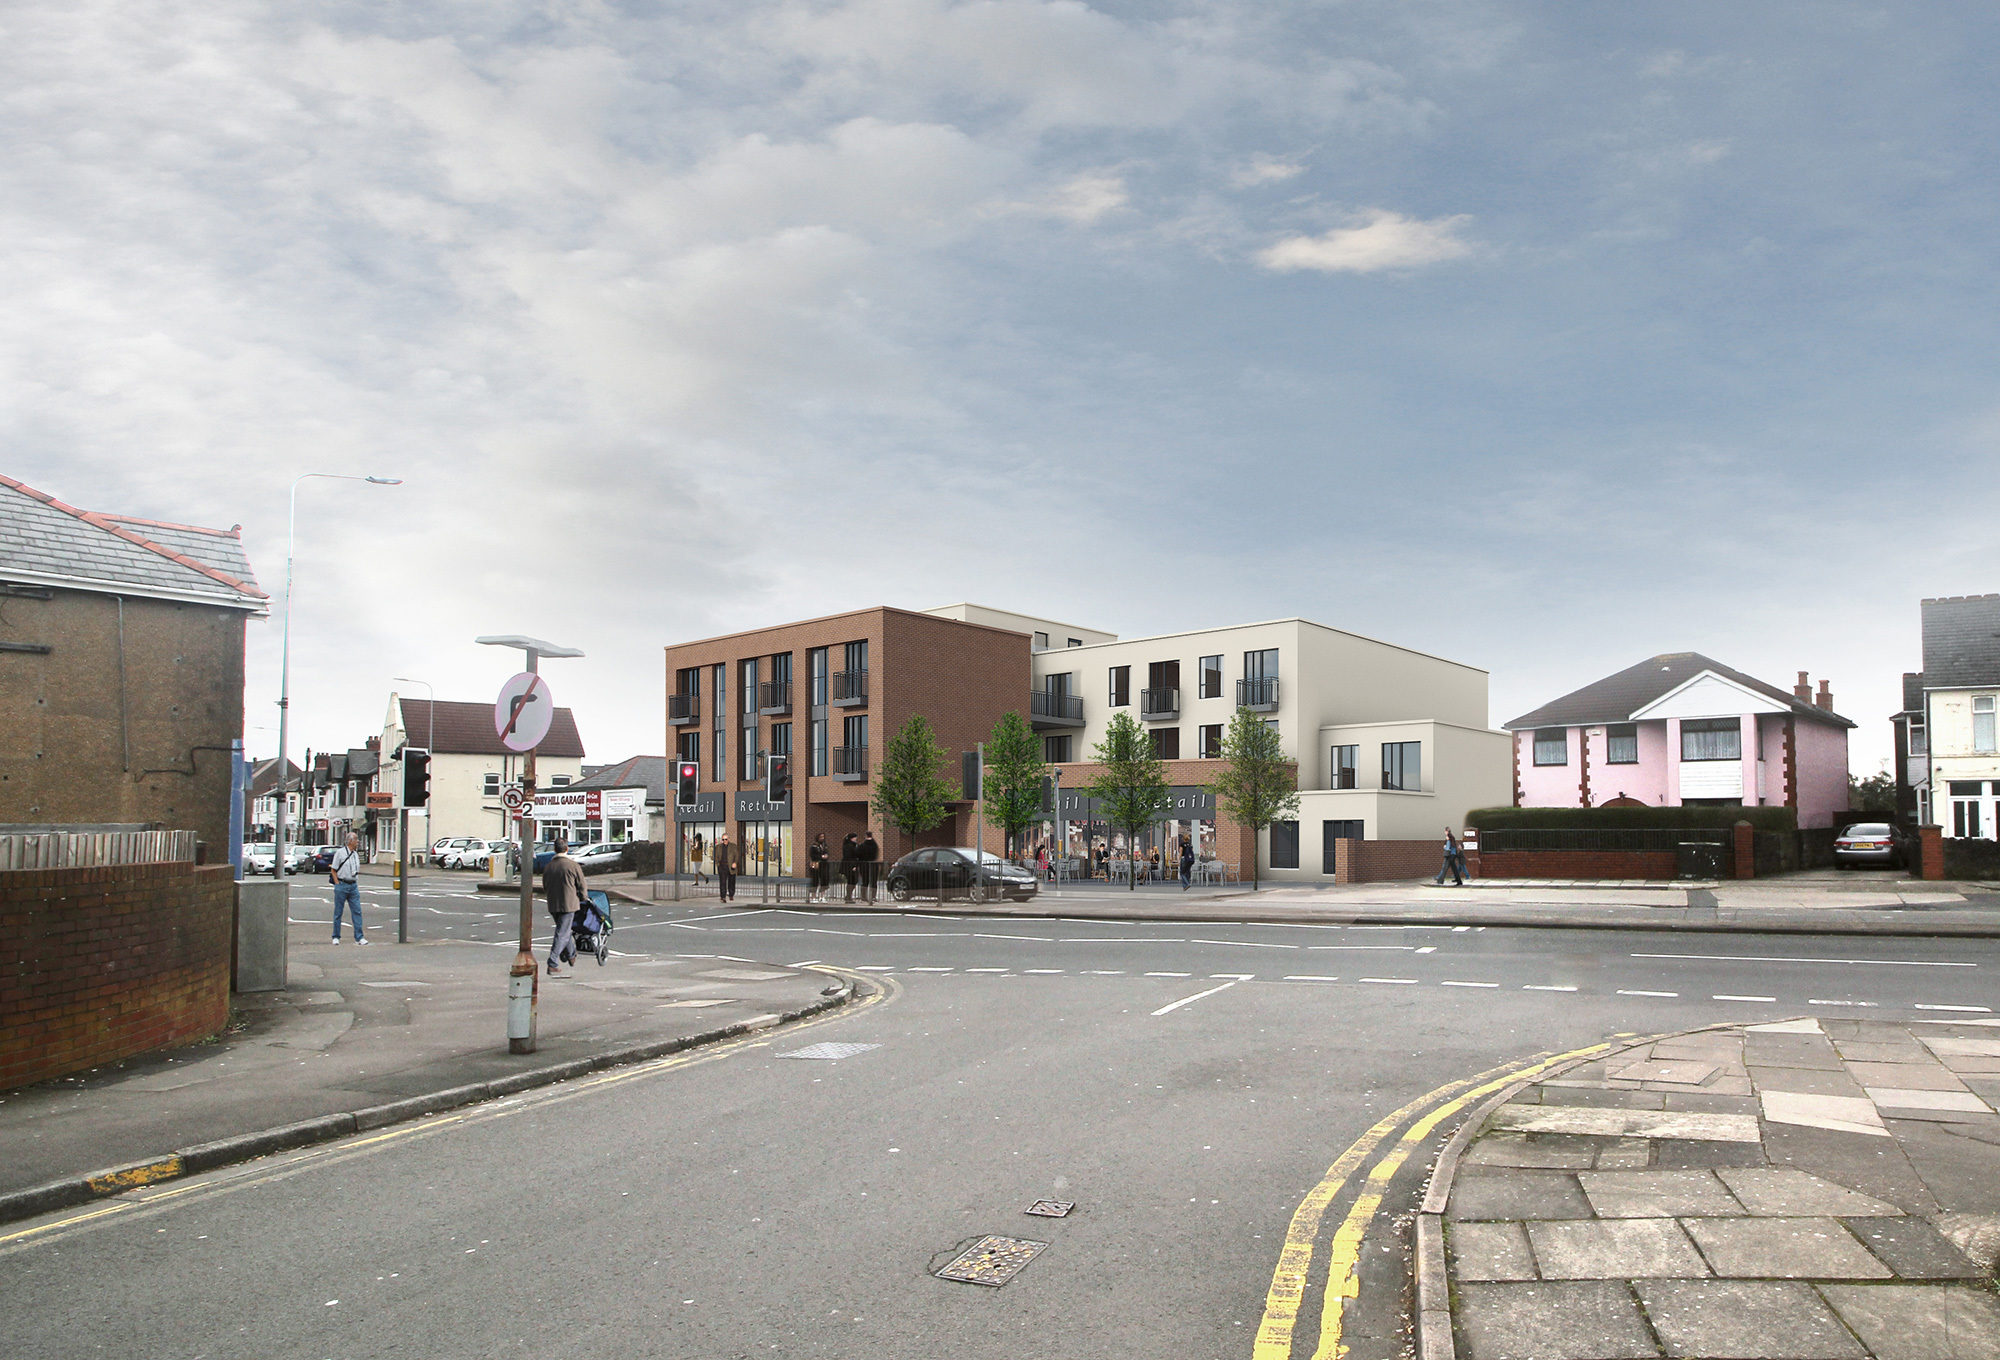 Photographic render of how proposed apartments would look in-situ